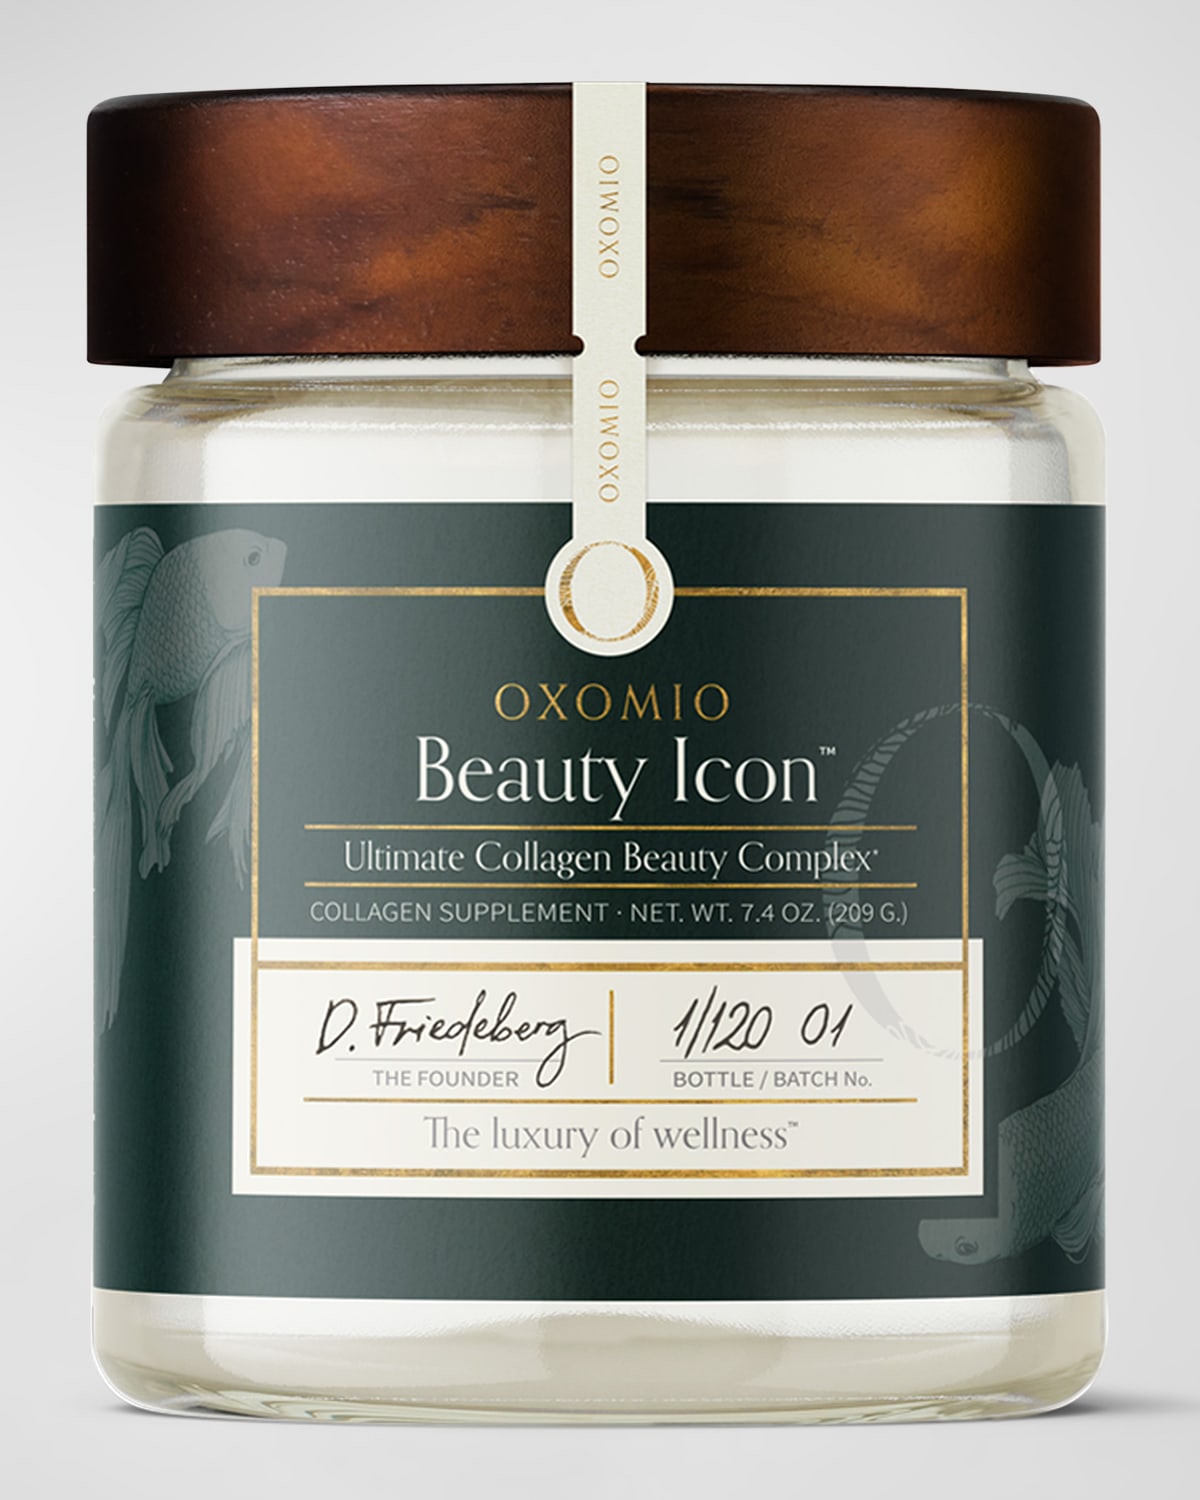 Beauty Icon Ultimate Collagen Beauty Complex, 7.4 oz.